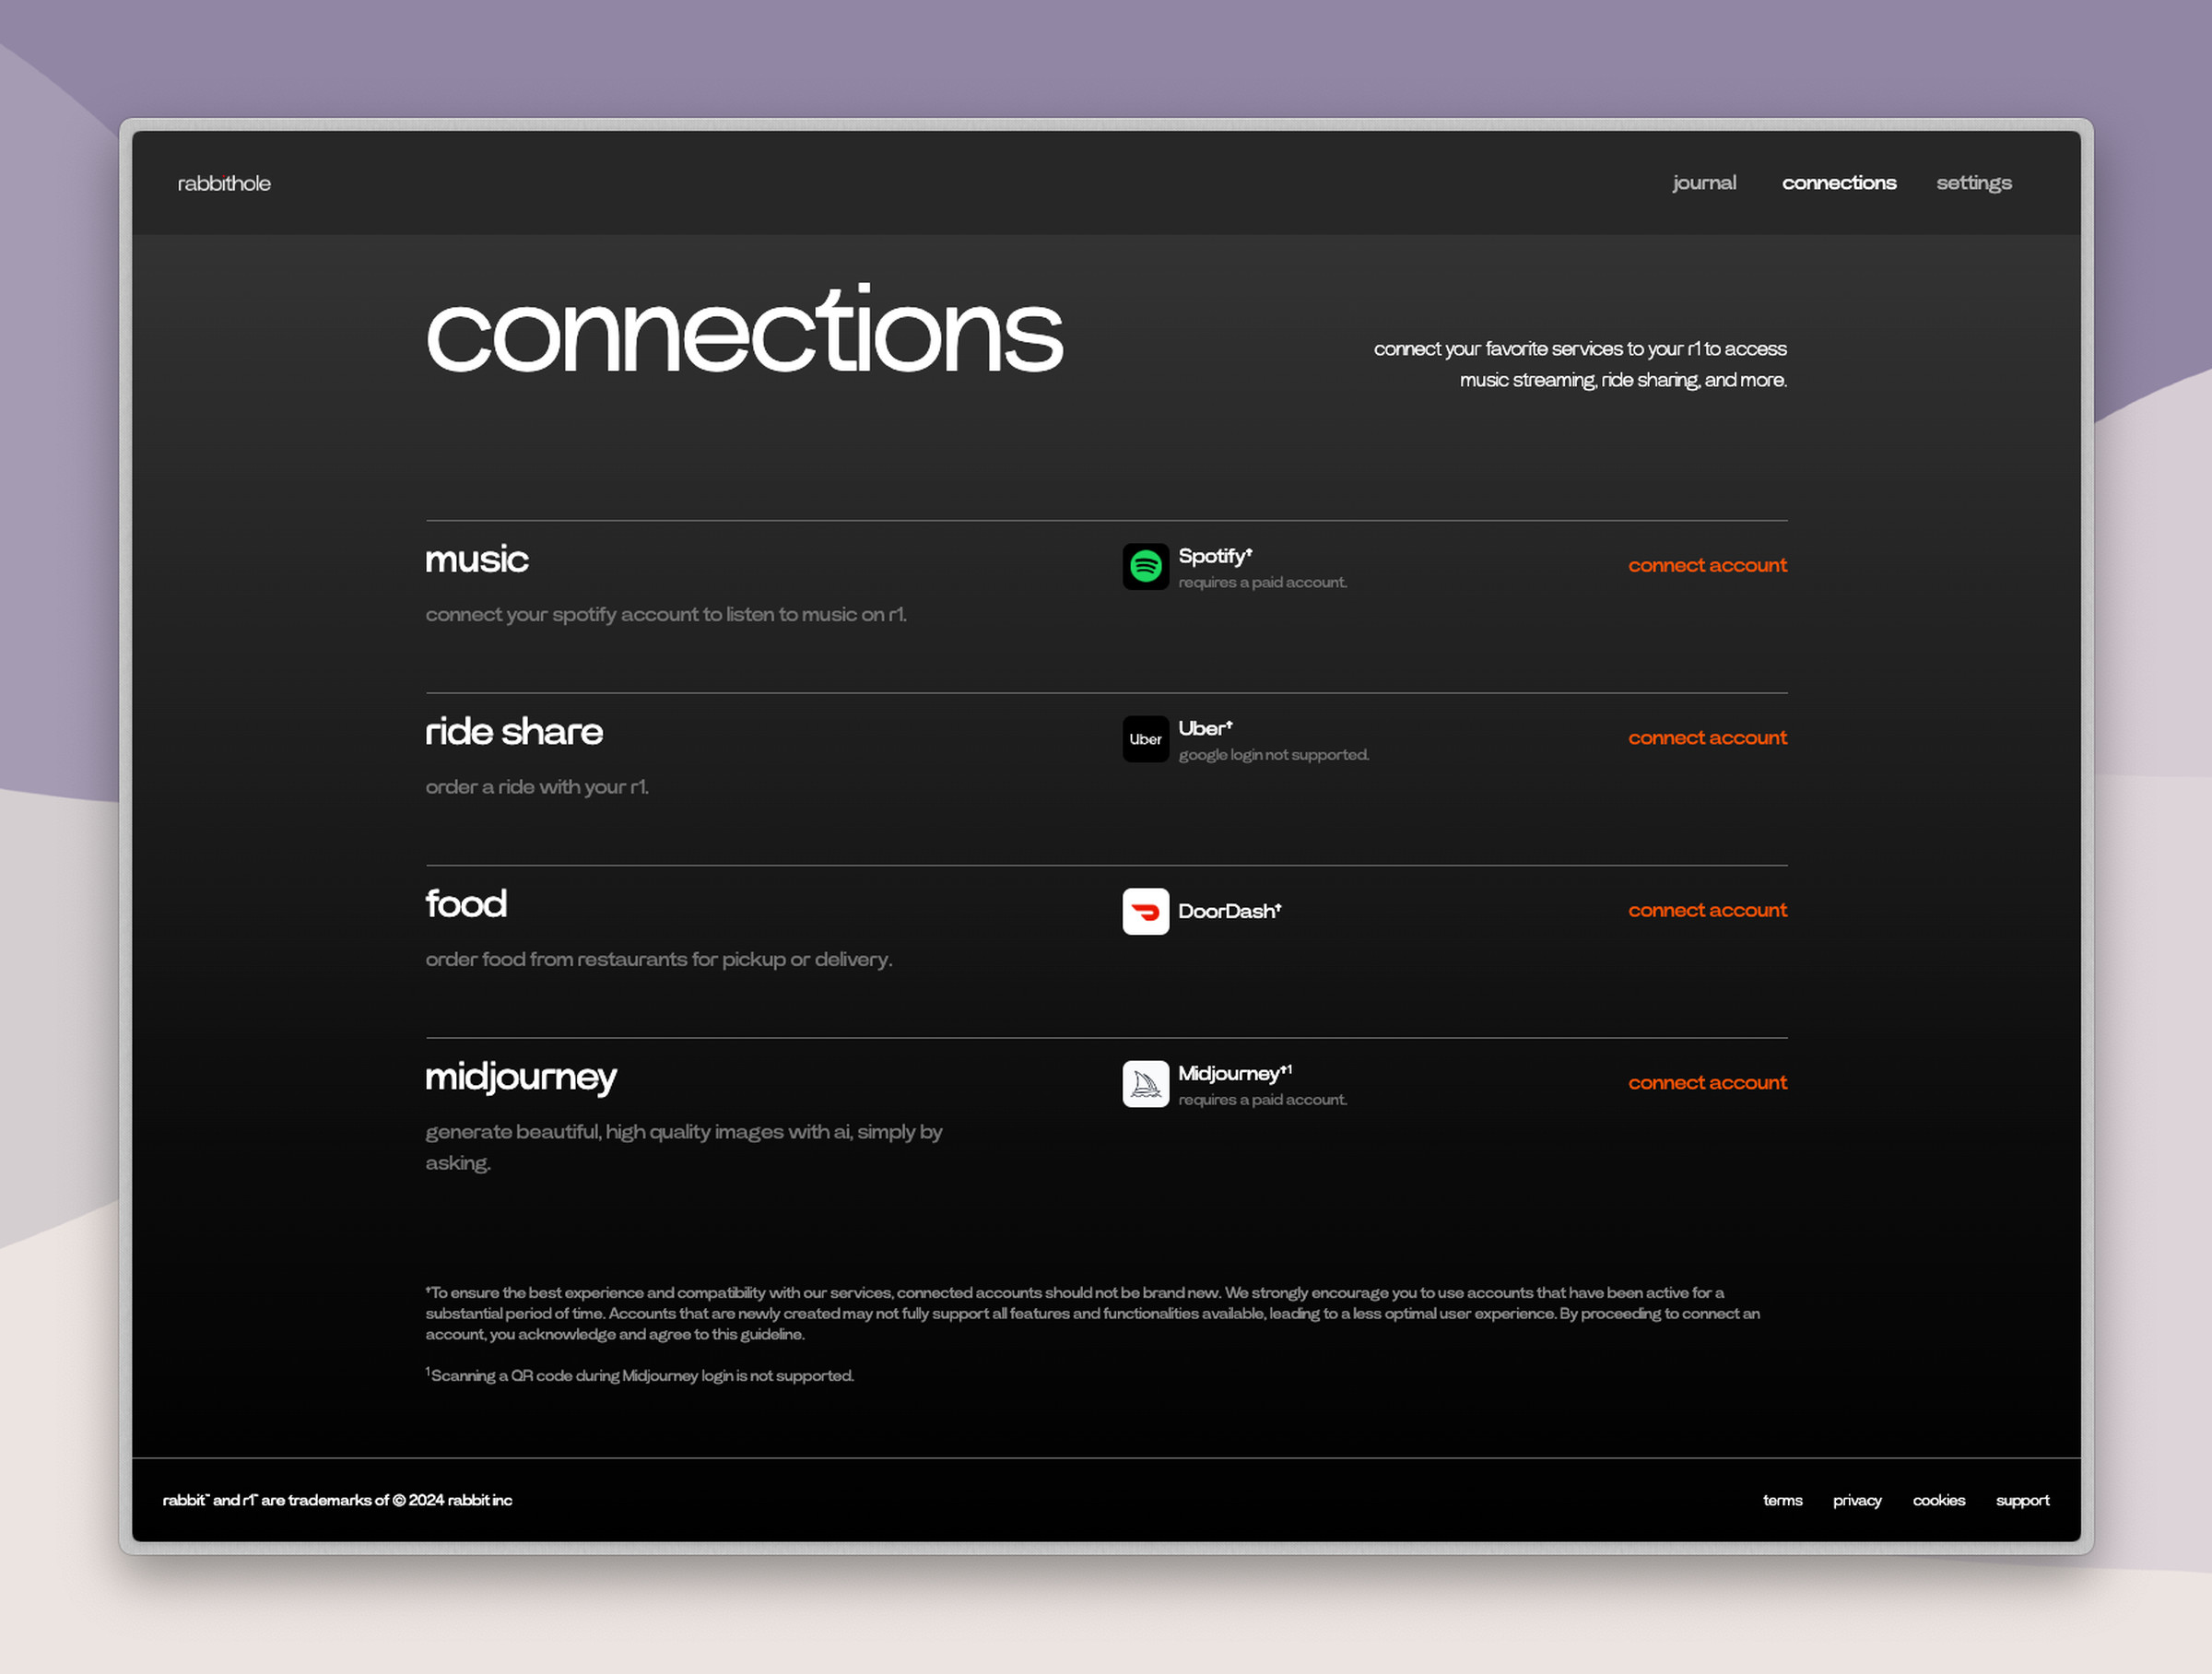 A screenshot of the Connections screen on Rabbithole.